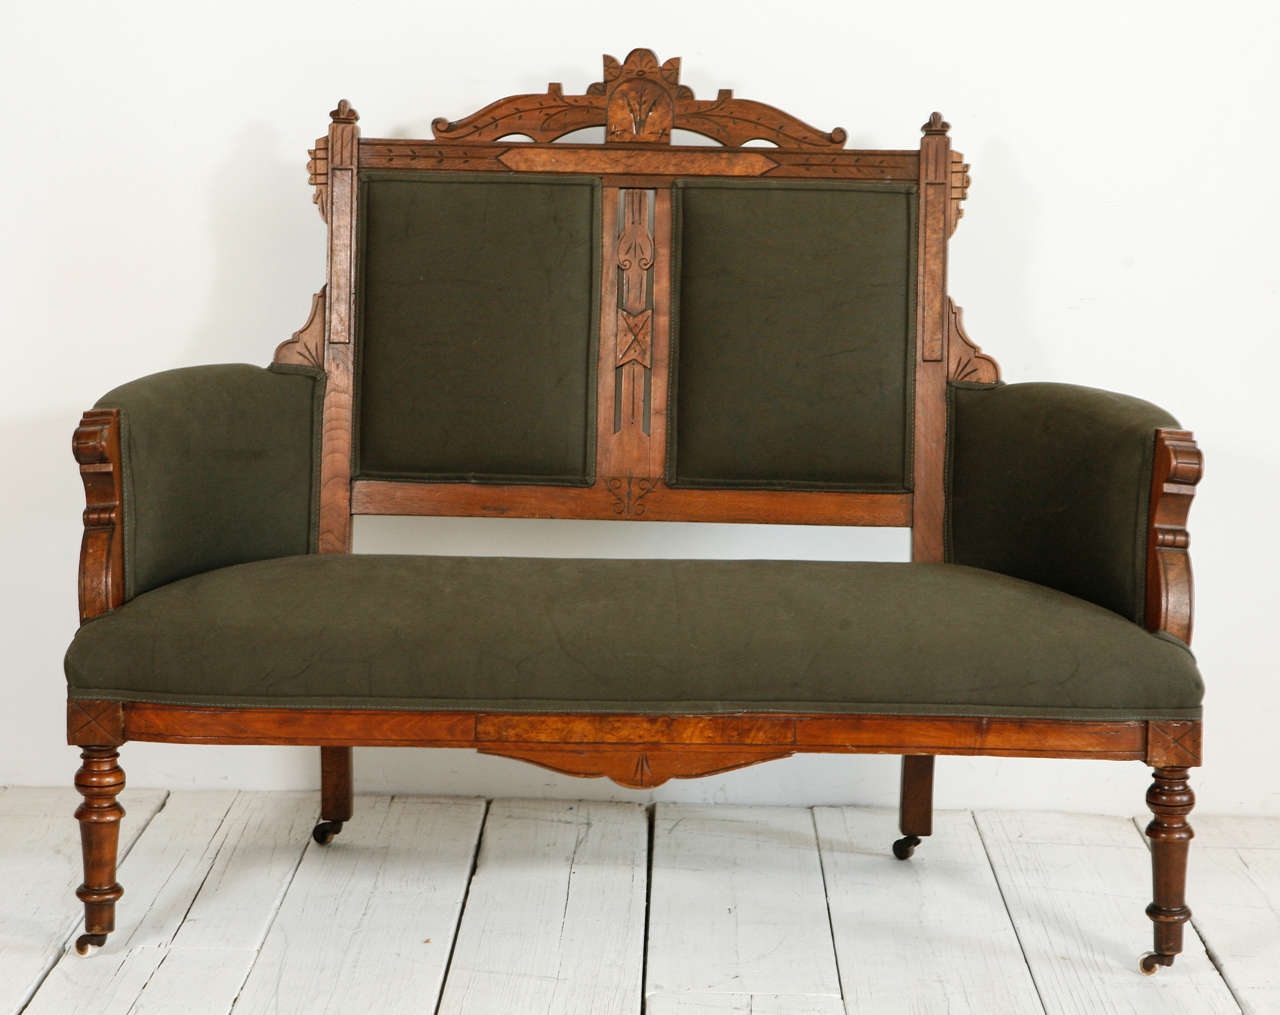 Edwardian-style wood frame newly reupholstered in a cotton army green canvas.